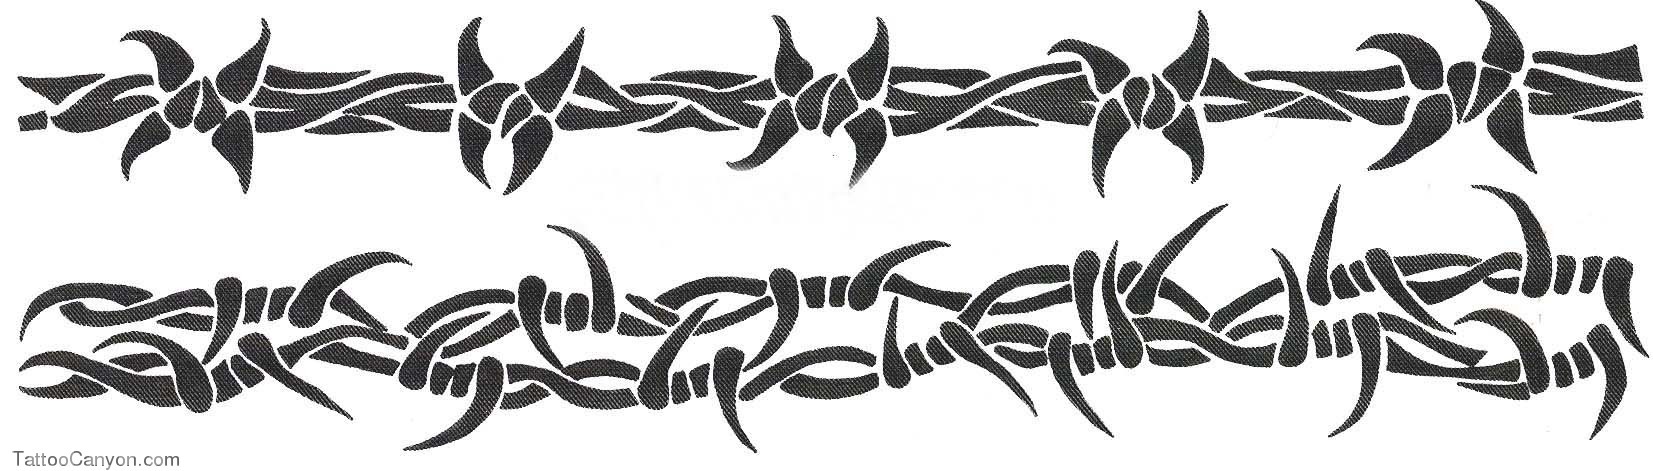 Barbed Wire Barbwire Temporary Tattoo Sticker  OhMyTat